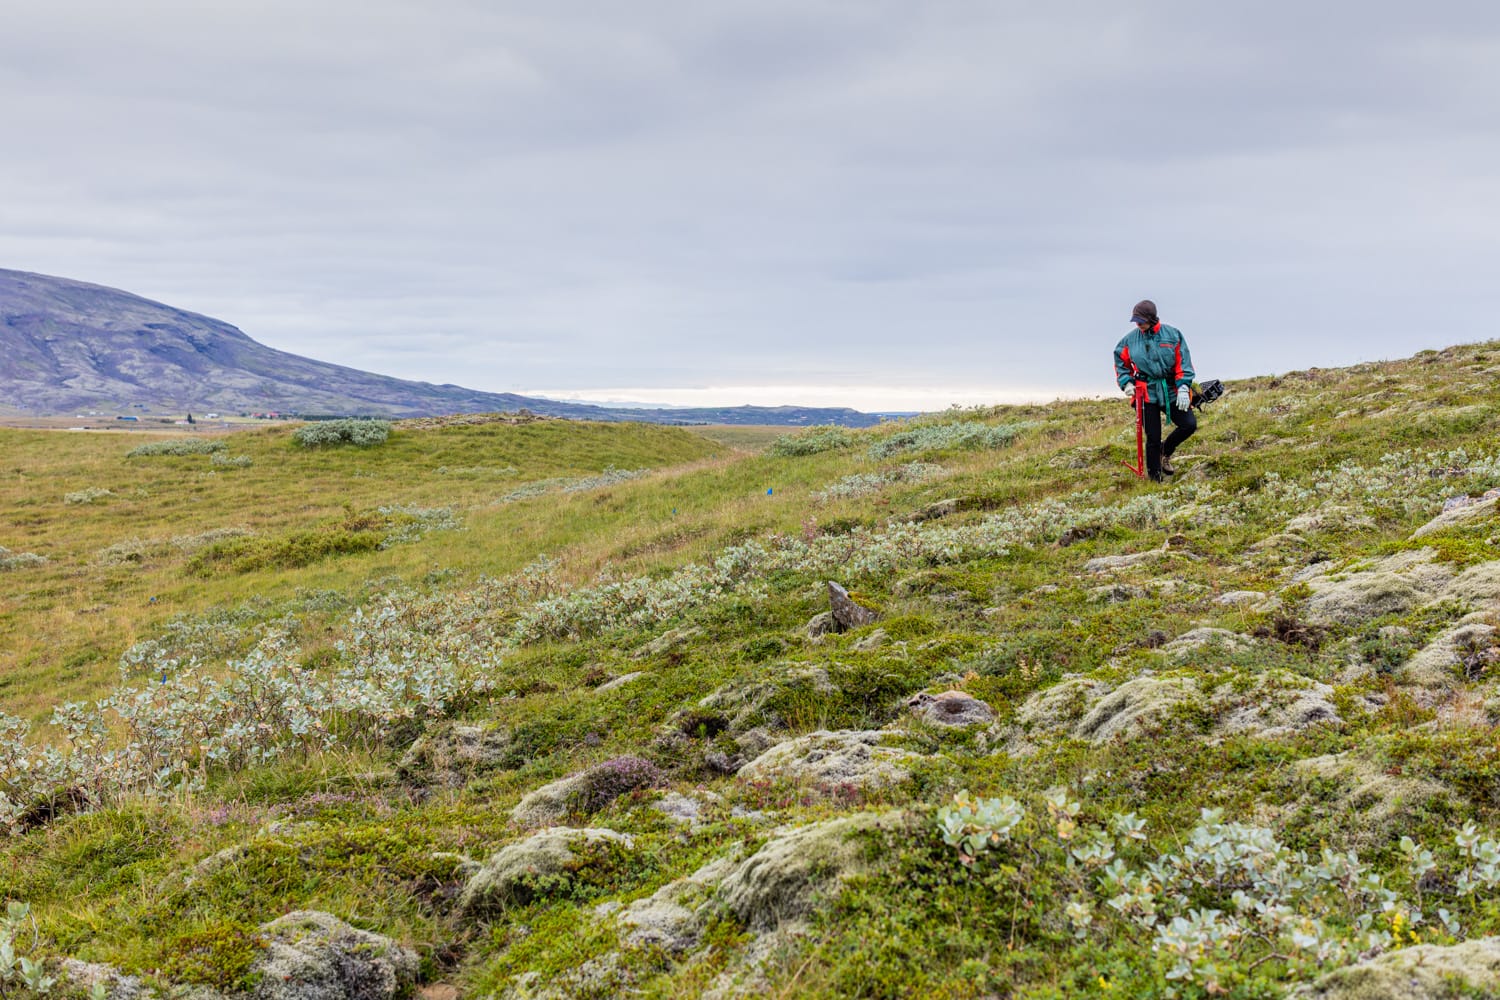 an individual wearing bright clothing walking through the mossy Icelandic nature